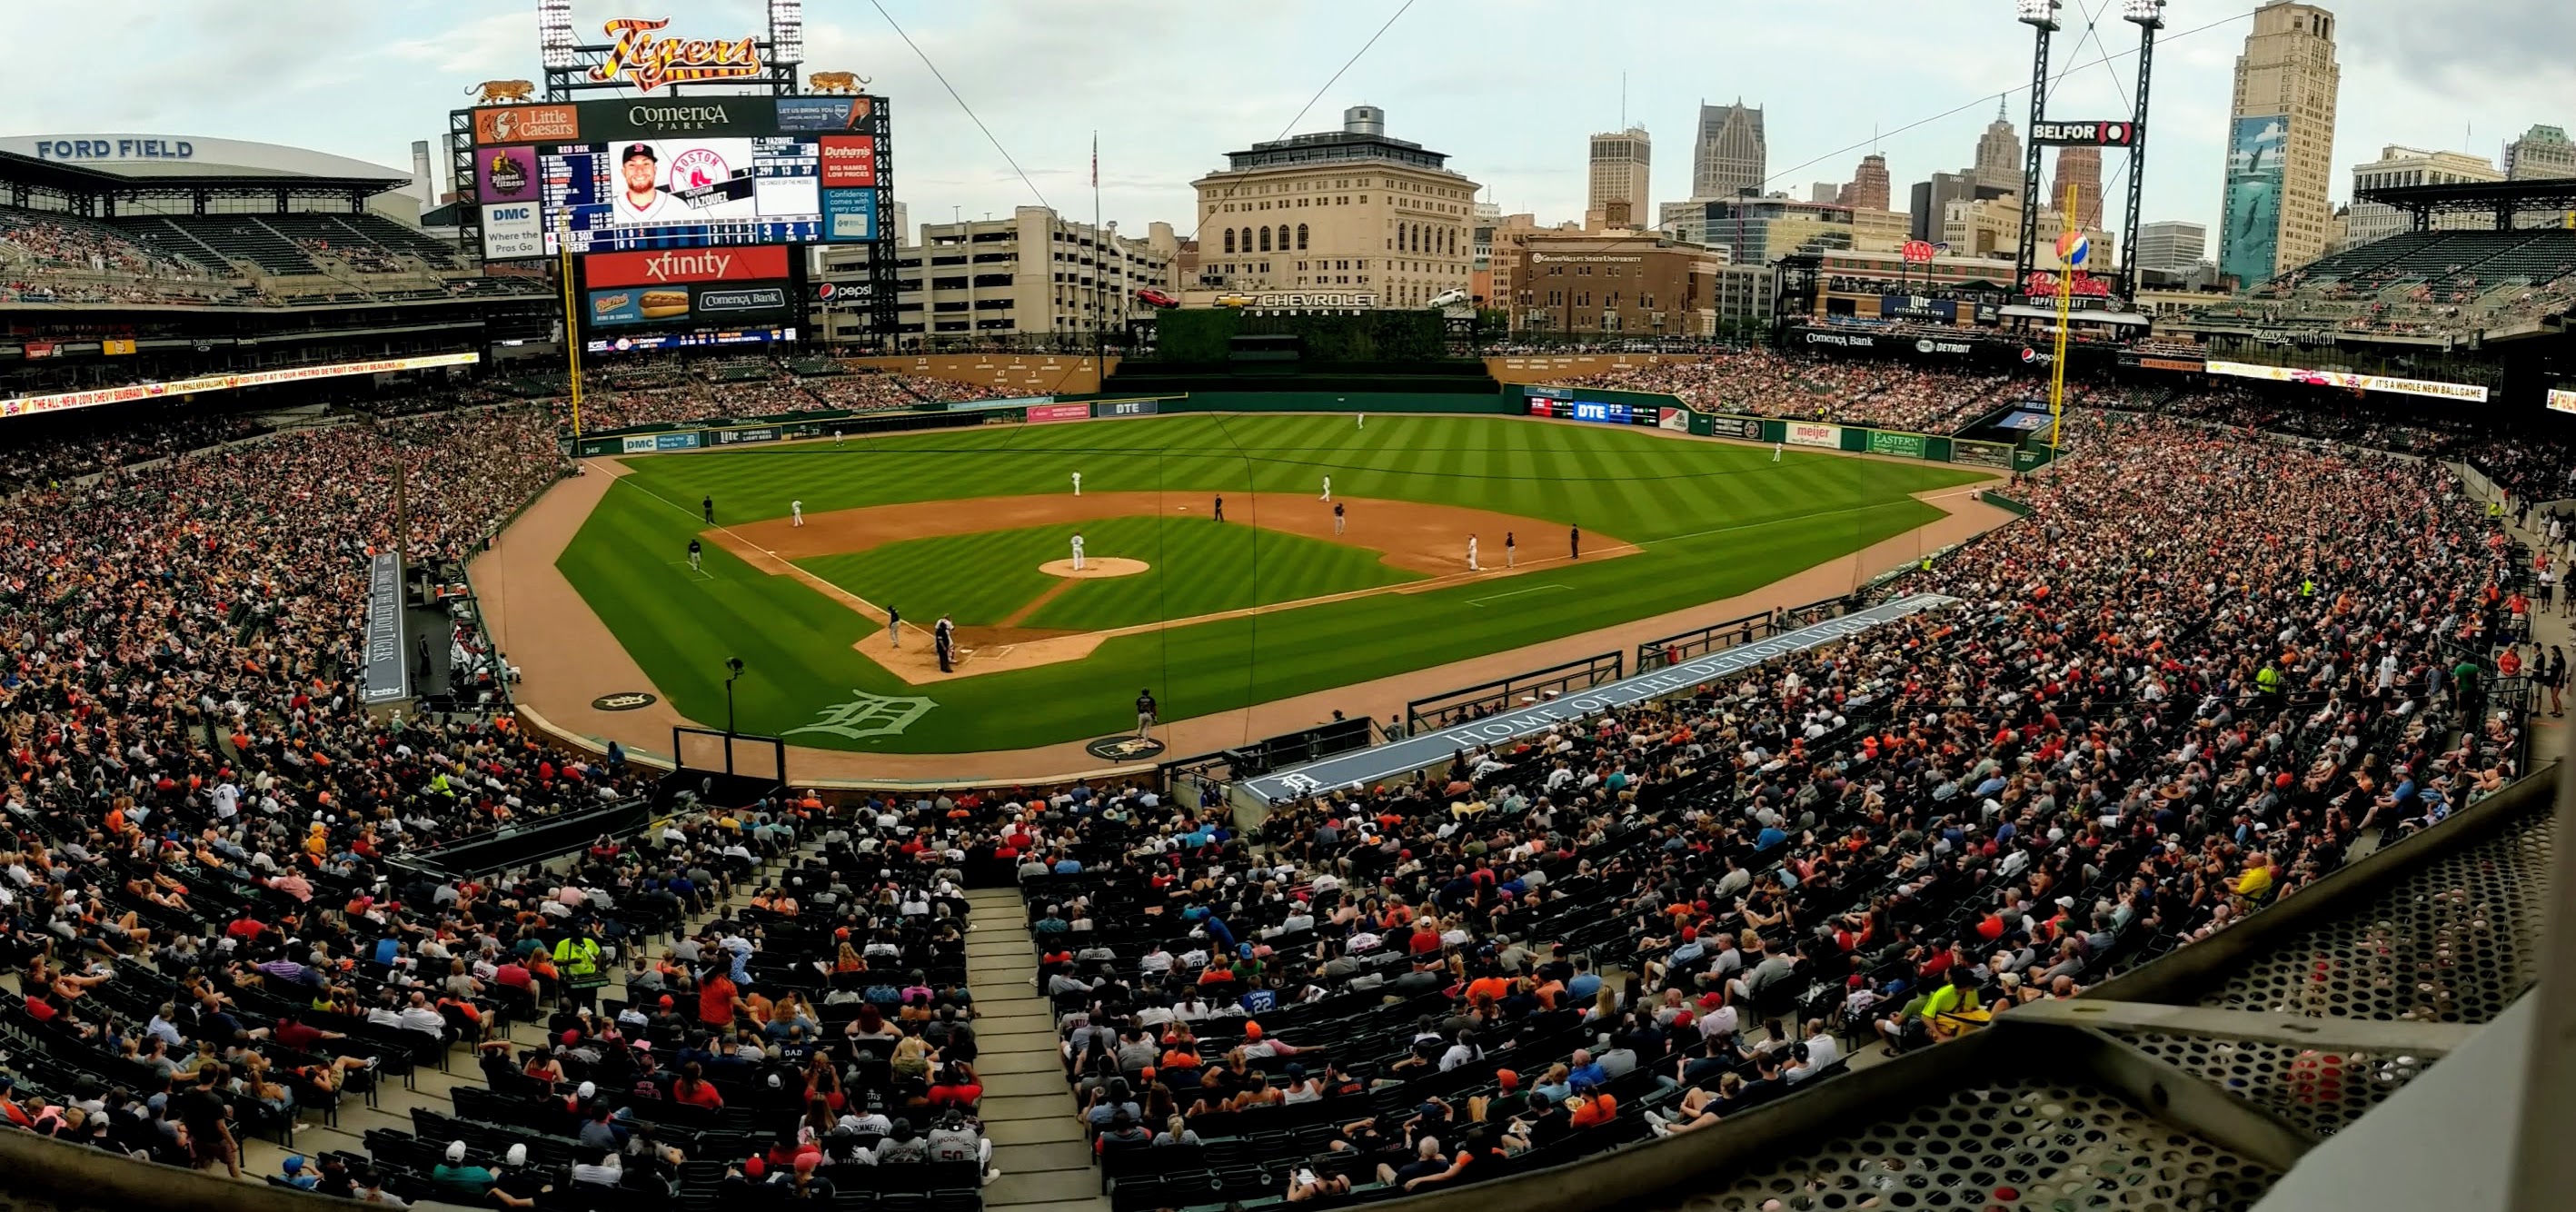 Stadium countdown: Comerica Park perfect for Tigers